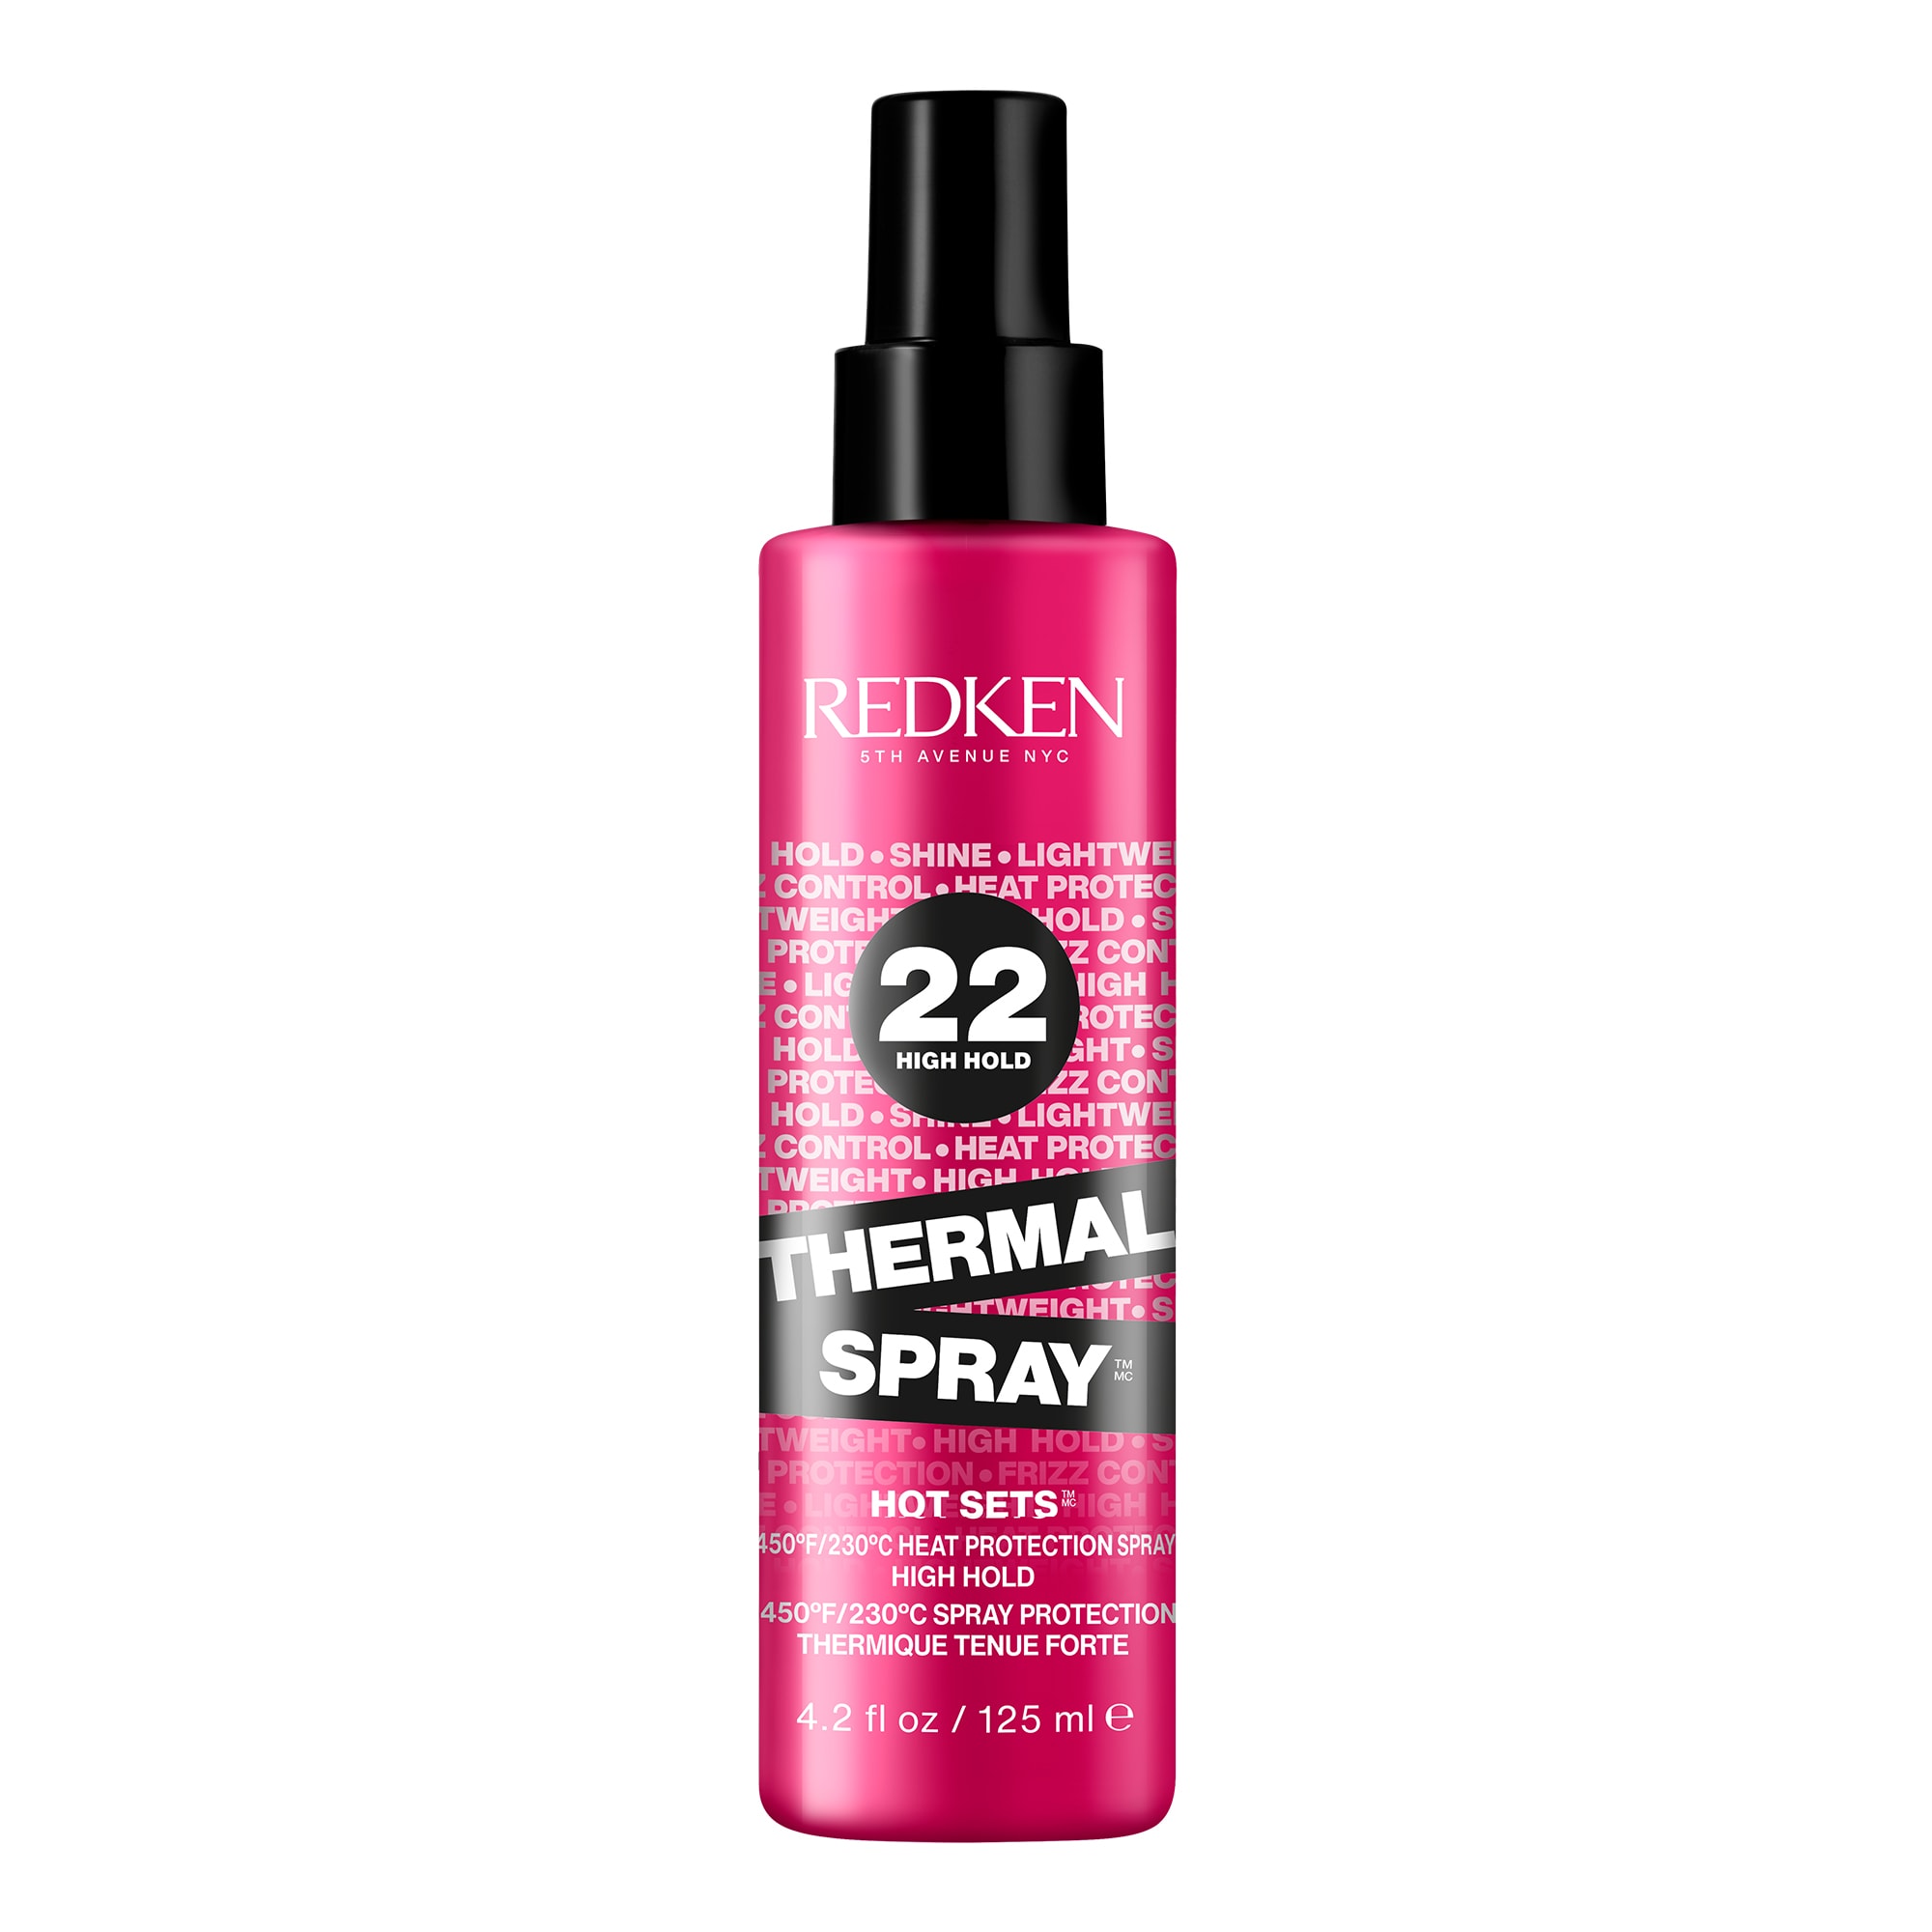 https://www.redken.ca/-/media/project/loreal/brand-sites/redken/americas/ca/product-information/product-images/styling/thermal-spray-high-hold/redken-2022-styling-reno-thermal-spray-high-hold-ecom-atf-packshot-2000x2000.jpg?rev=b60e05fc40f9442eb1251e846b8401d0